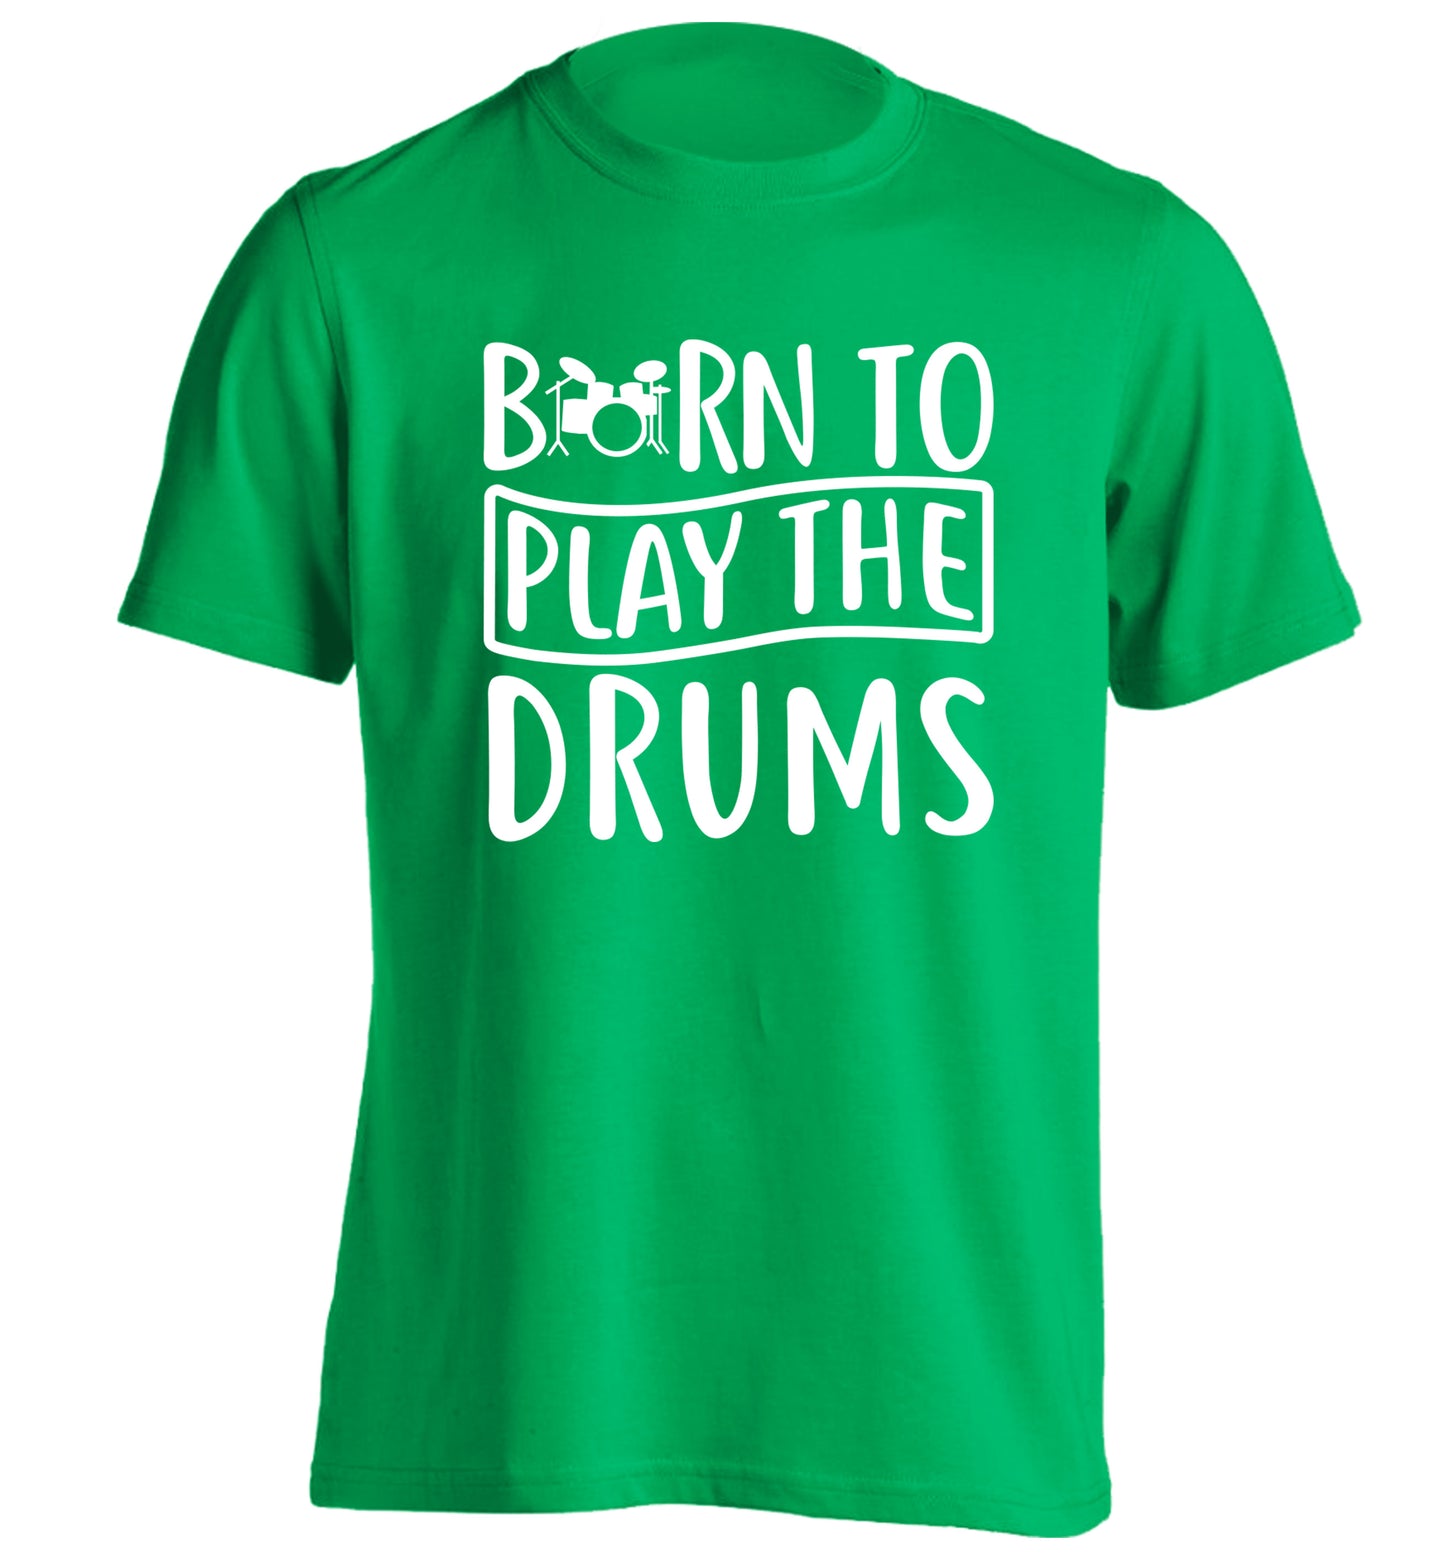 Born to play the drums adults unisex green Tshirt 2XL